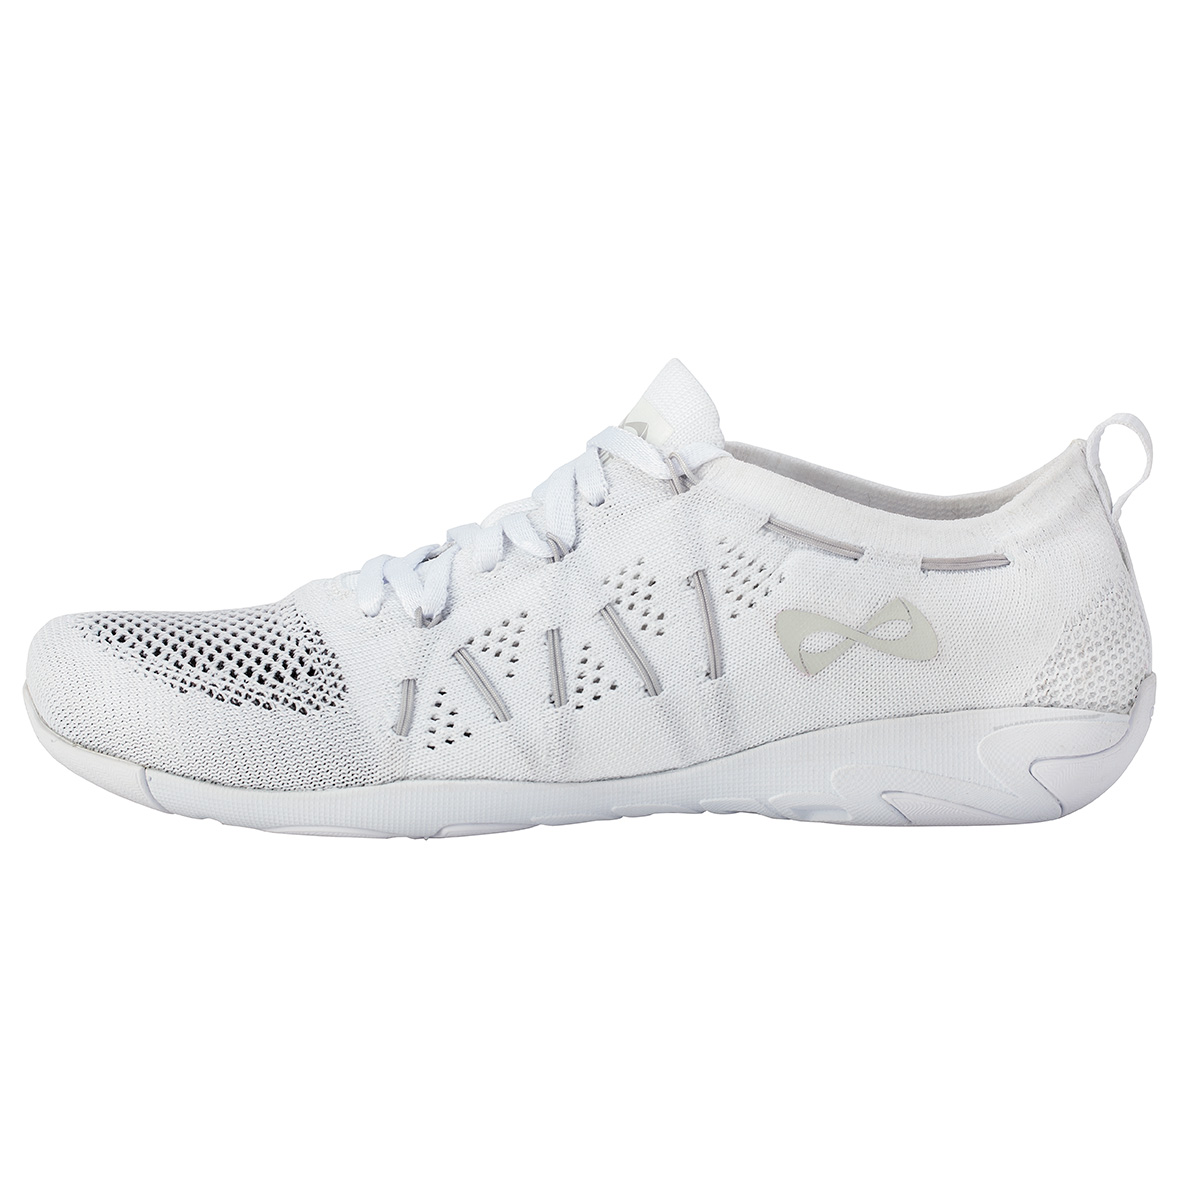 nfinity cheer shoes cheap